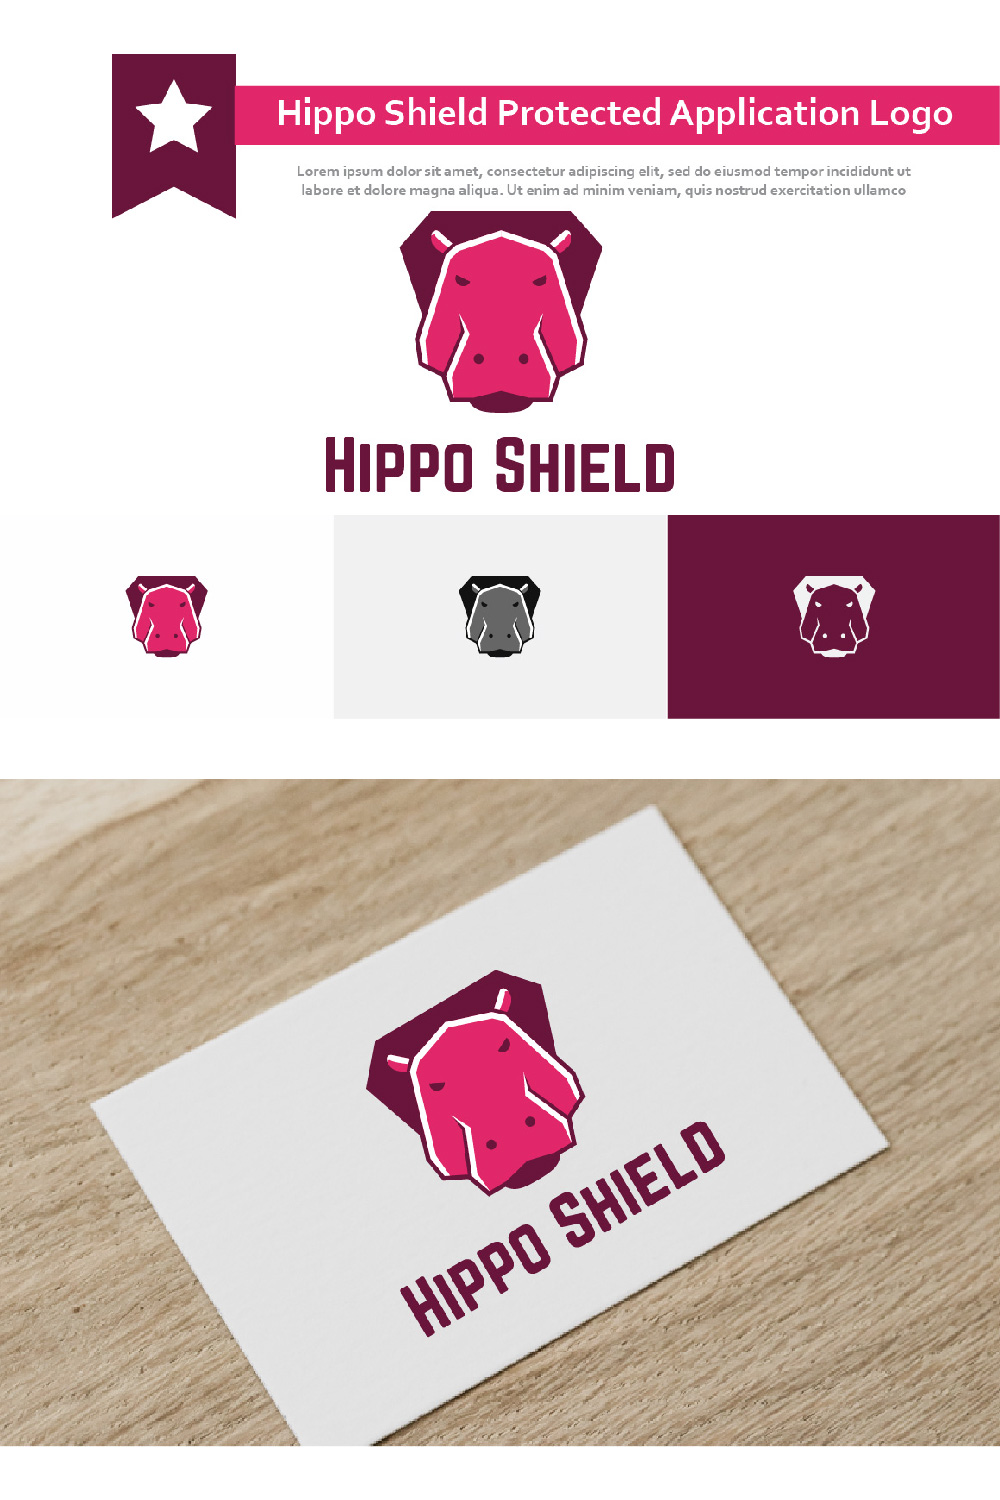 Hippo Shield Strong Protected Animal Game Application Logo pintarest.